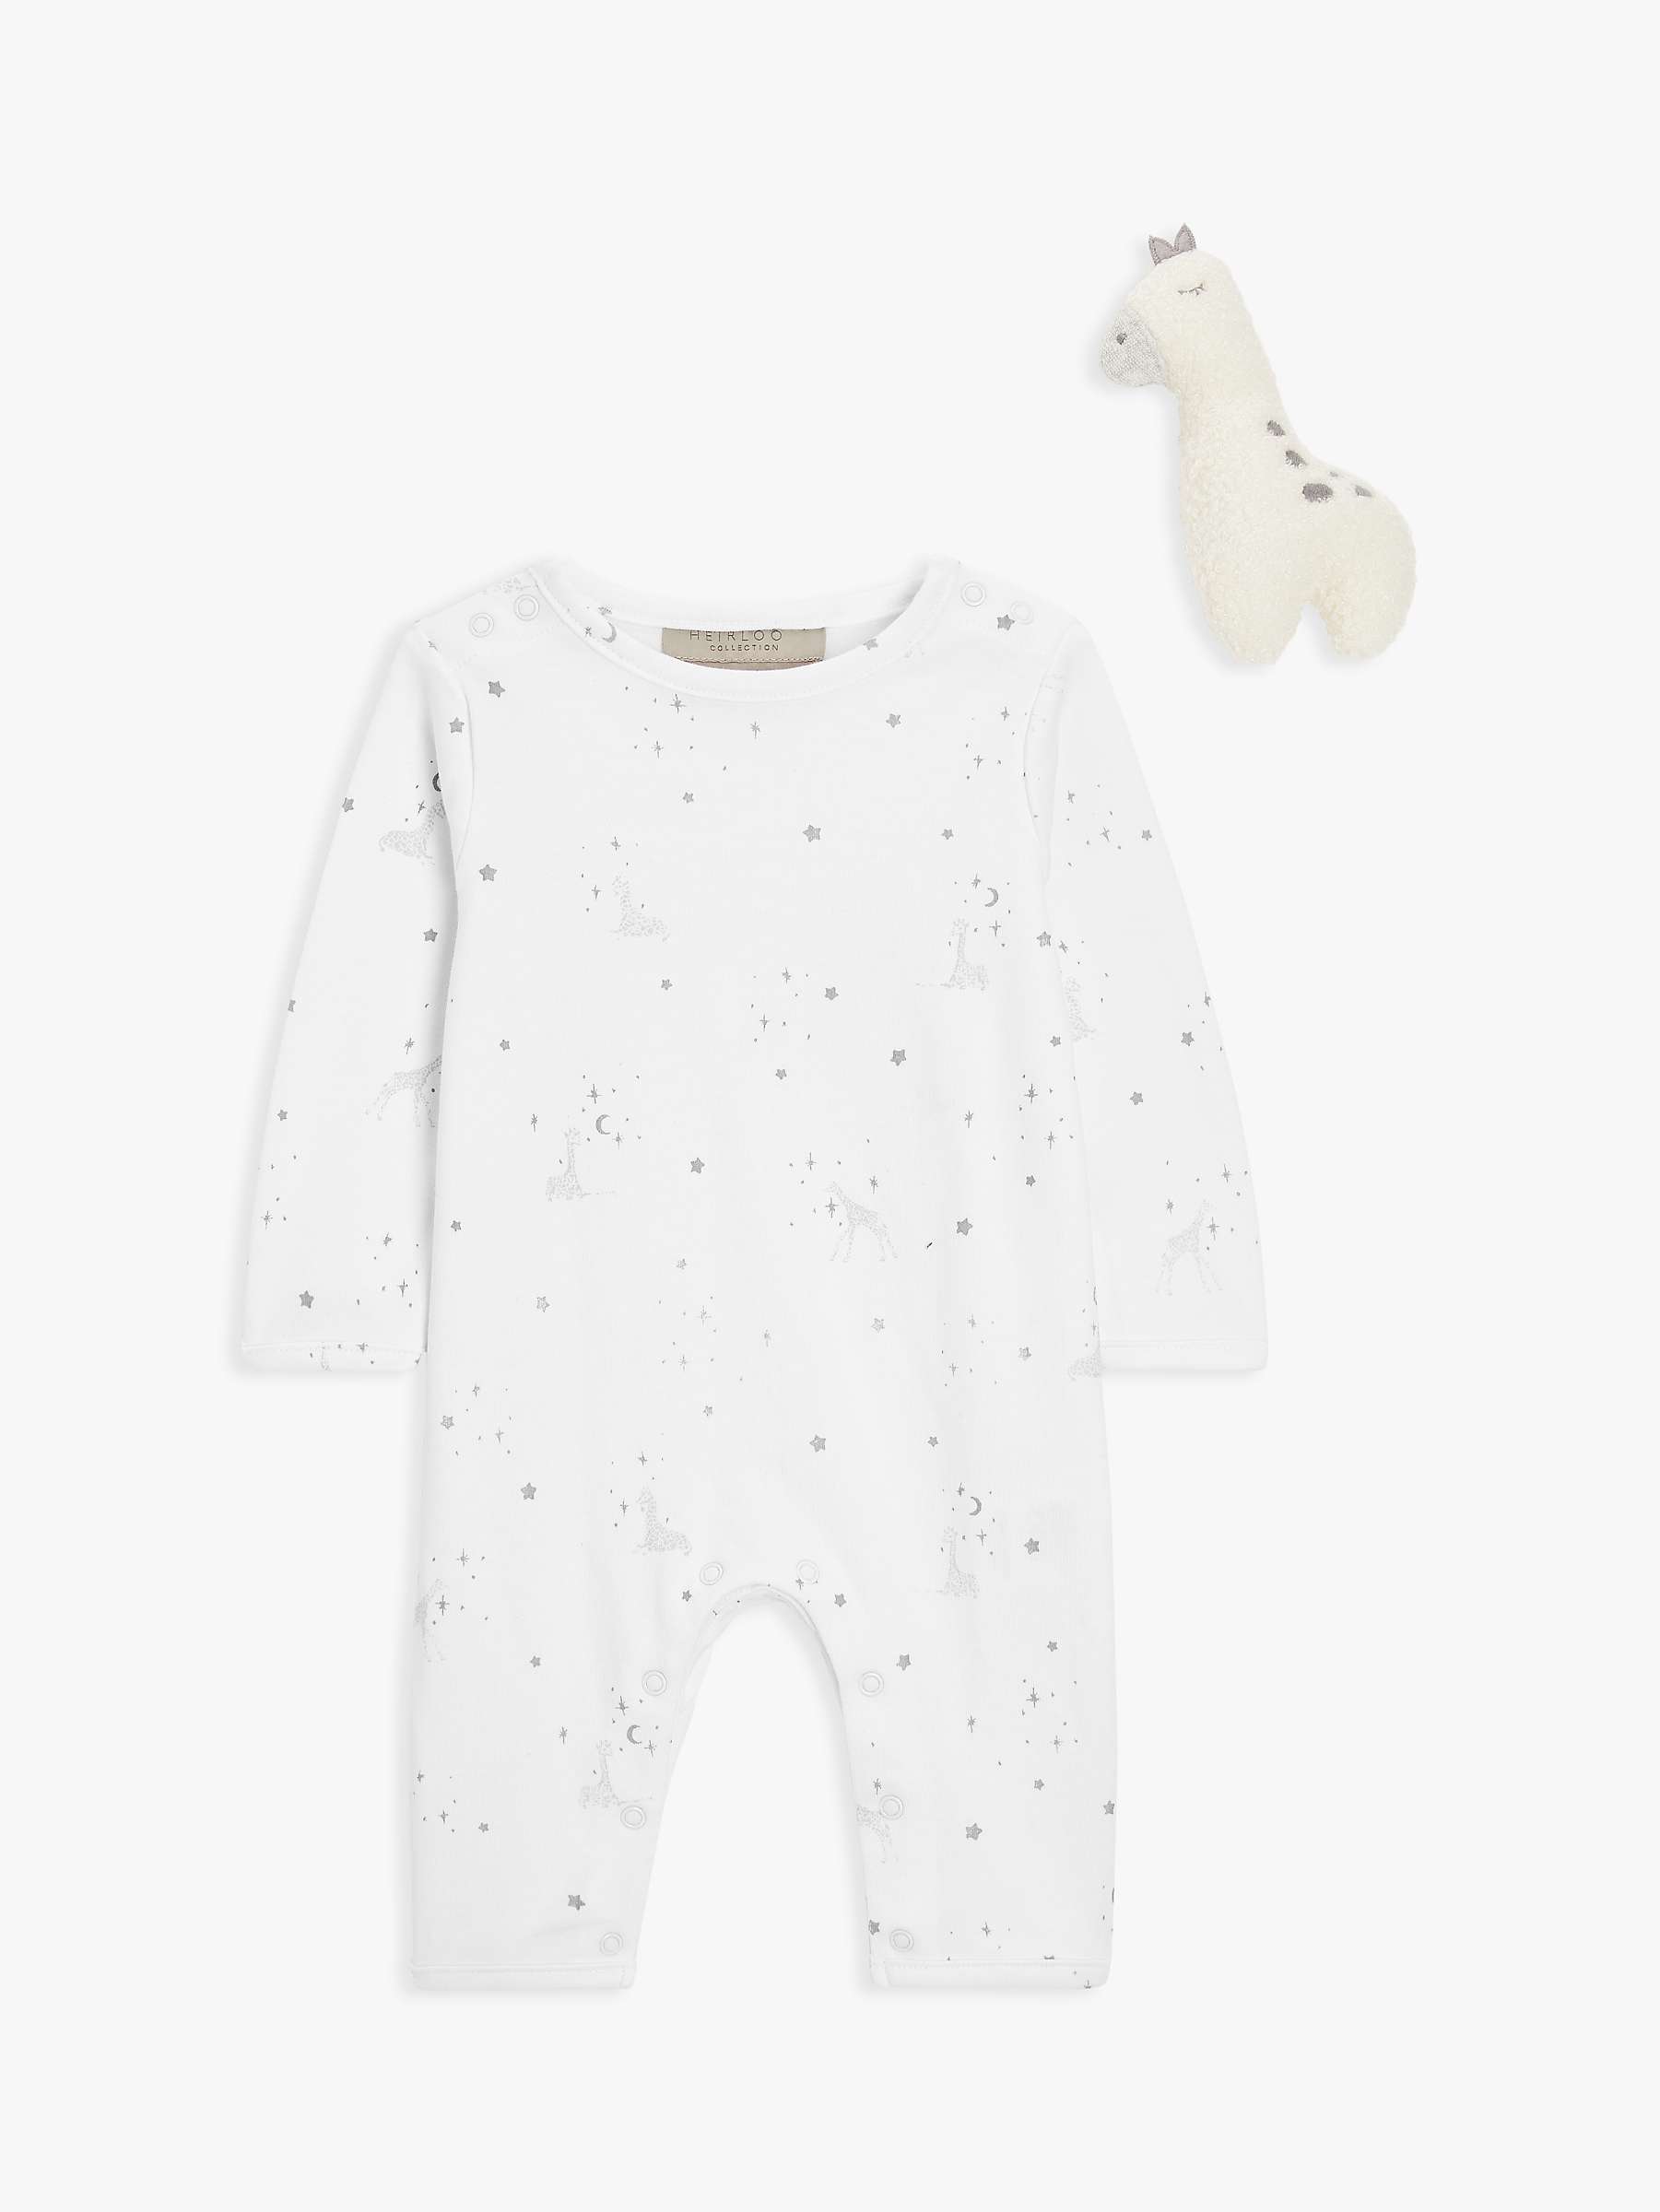 Buy John Lewis Heirloom Collection Baby Organic Cotton Giraffe Print Sleepsuit, Soft Toy and Gift Box Set Online at johnlewis.com